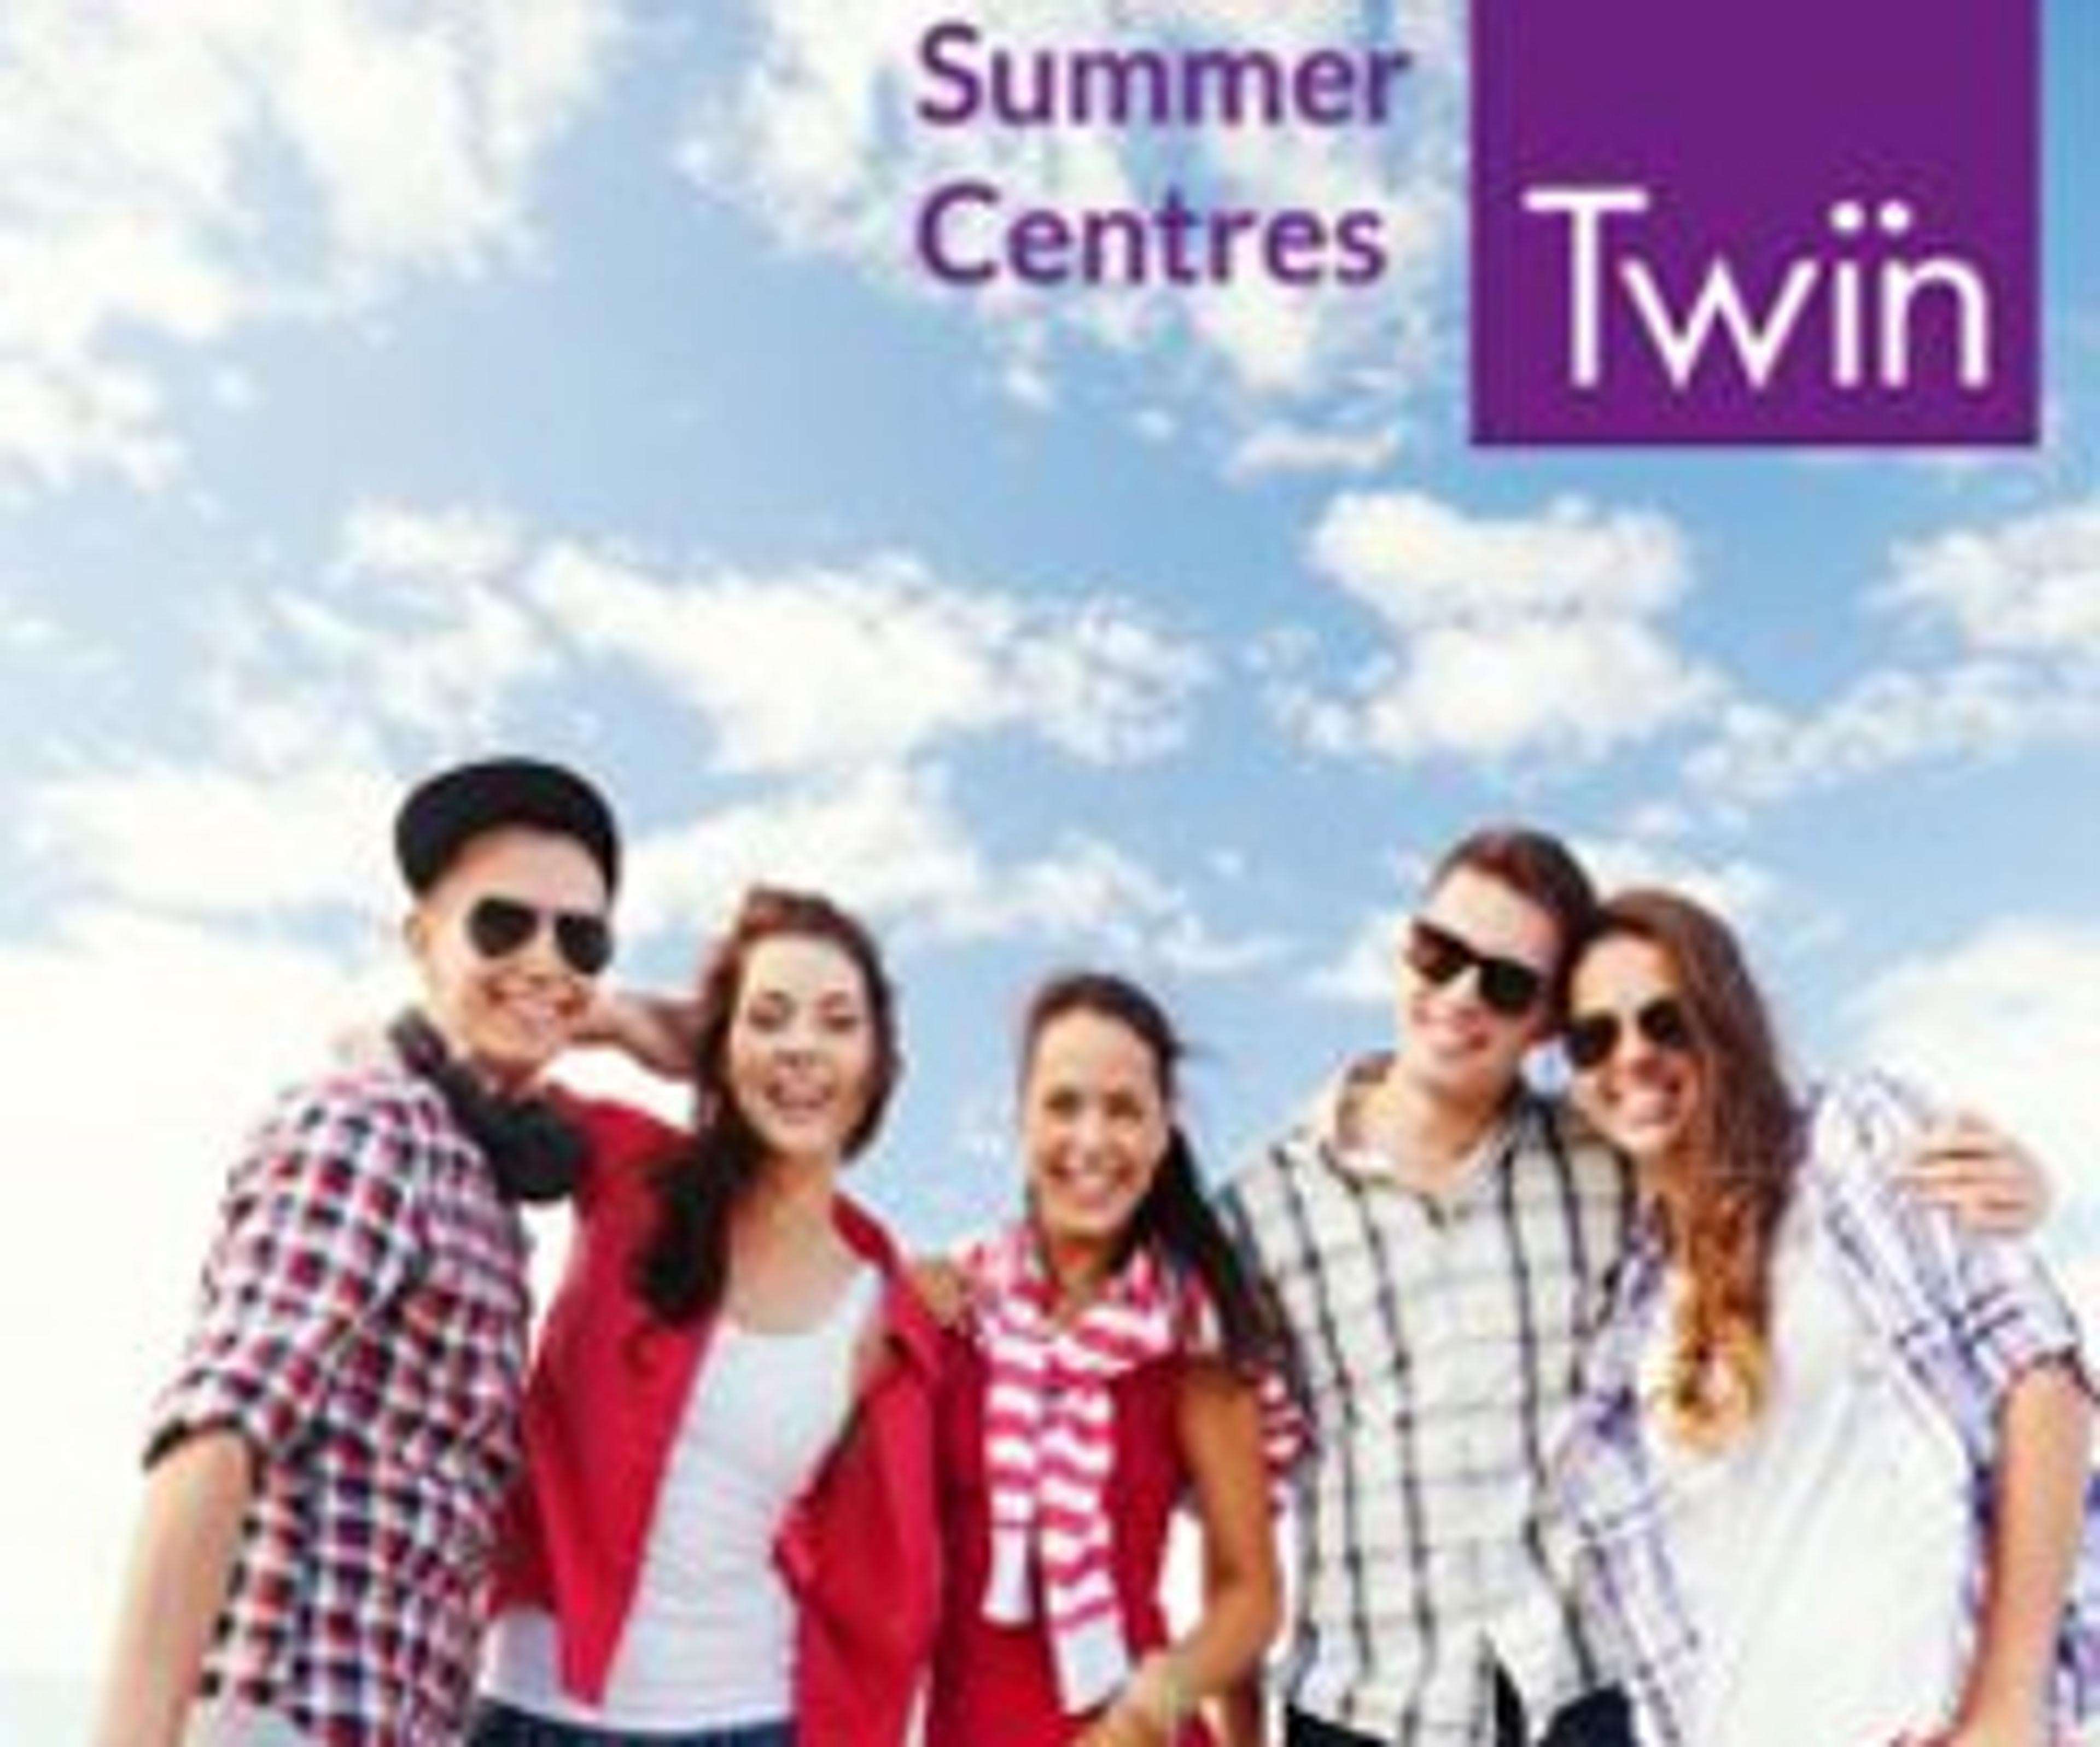 Twin Summer Centres App